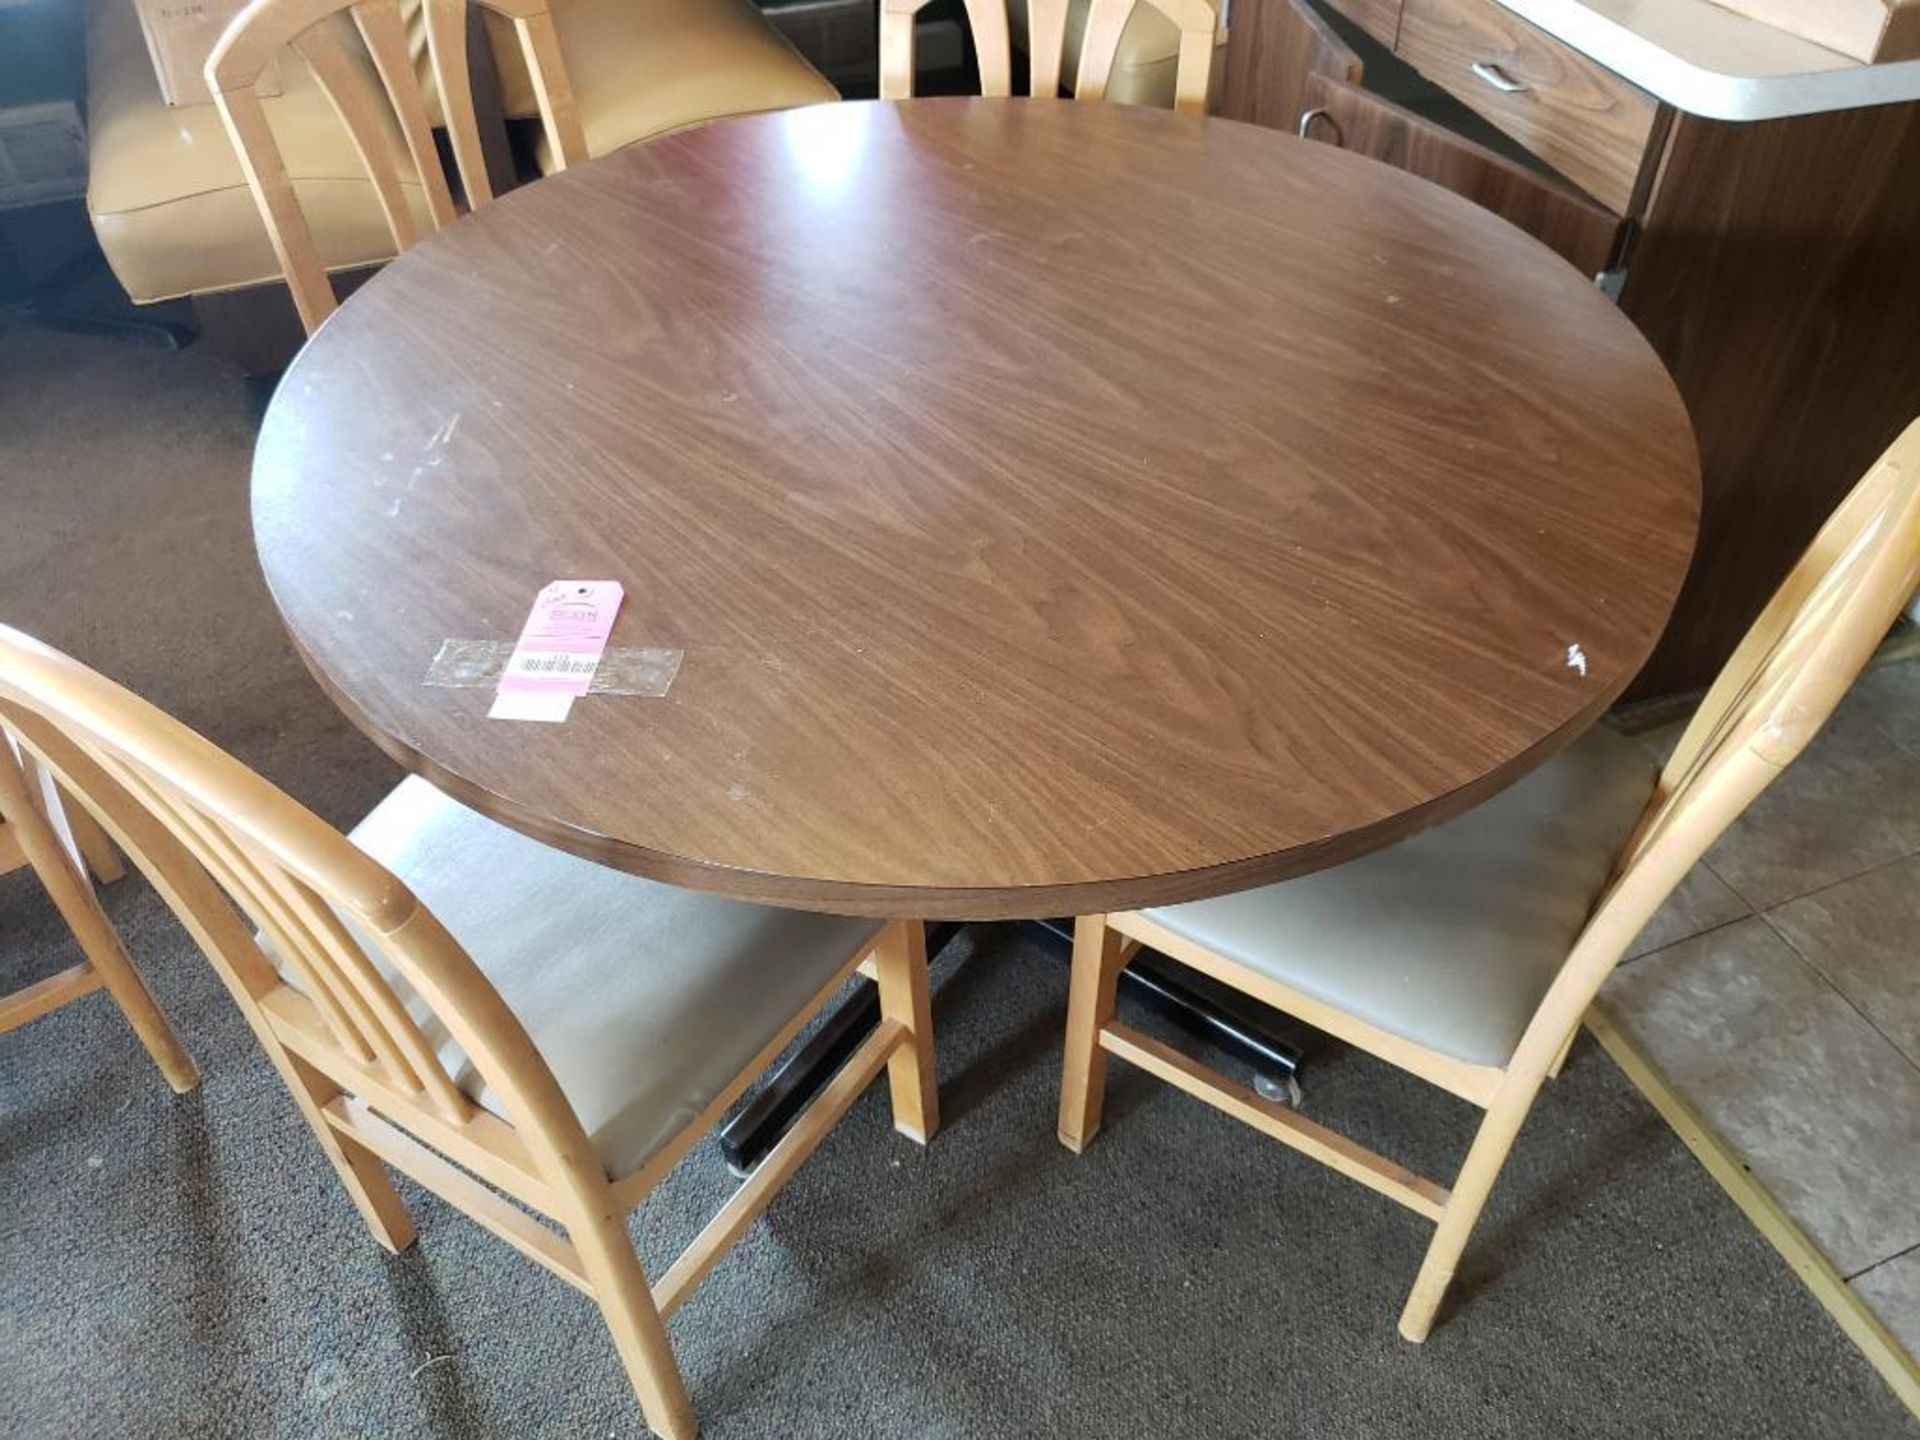 Table with 4 chairs. Table size 47in round. - Image 4 of 4